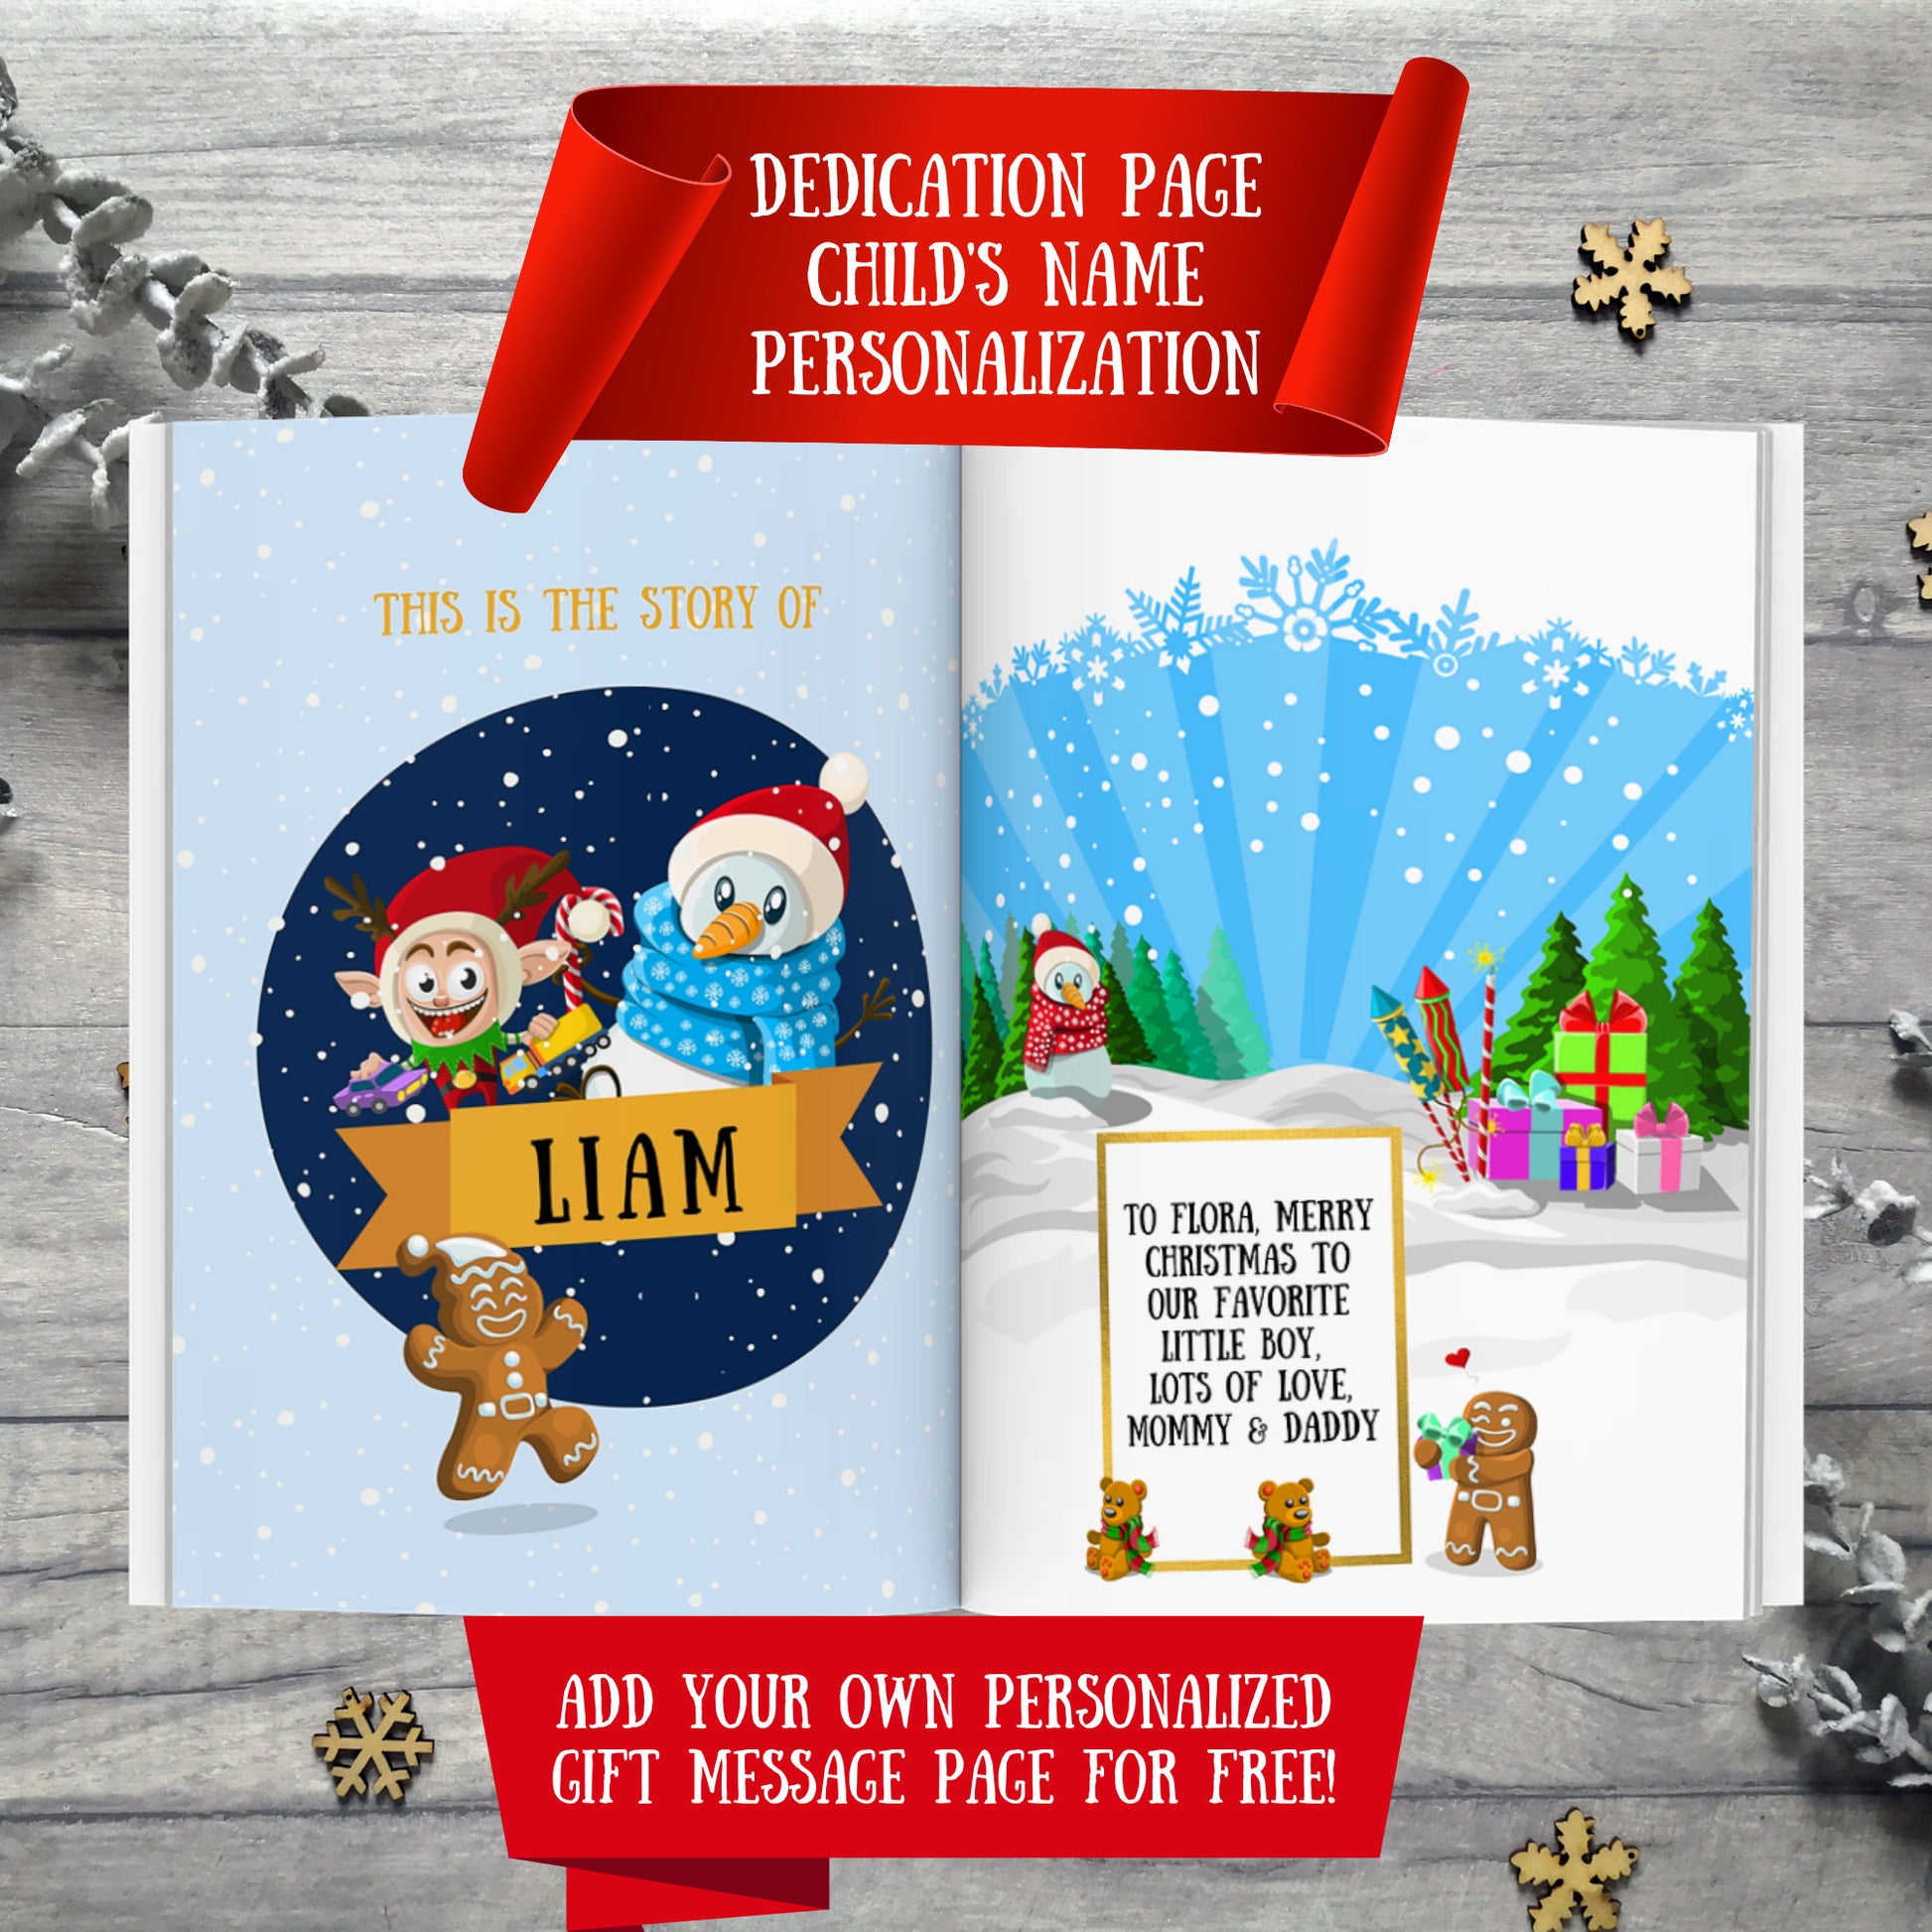 The Night Before Christmas - Personalized Children’s Book - Custom Children’s Xmas Book, a Classic Christmas Story w/child’s name